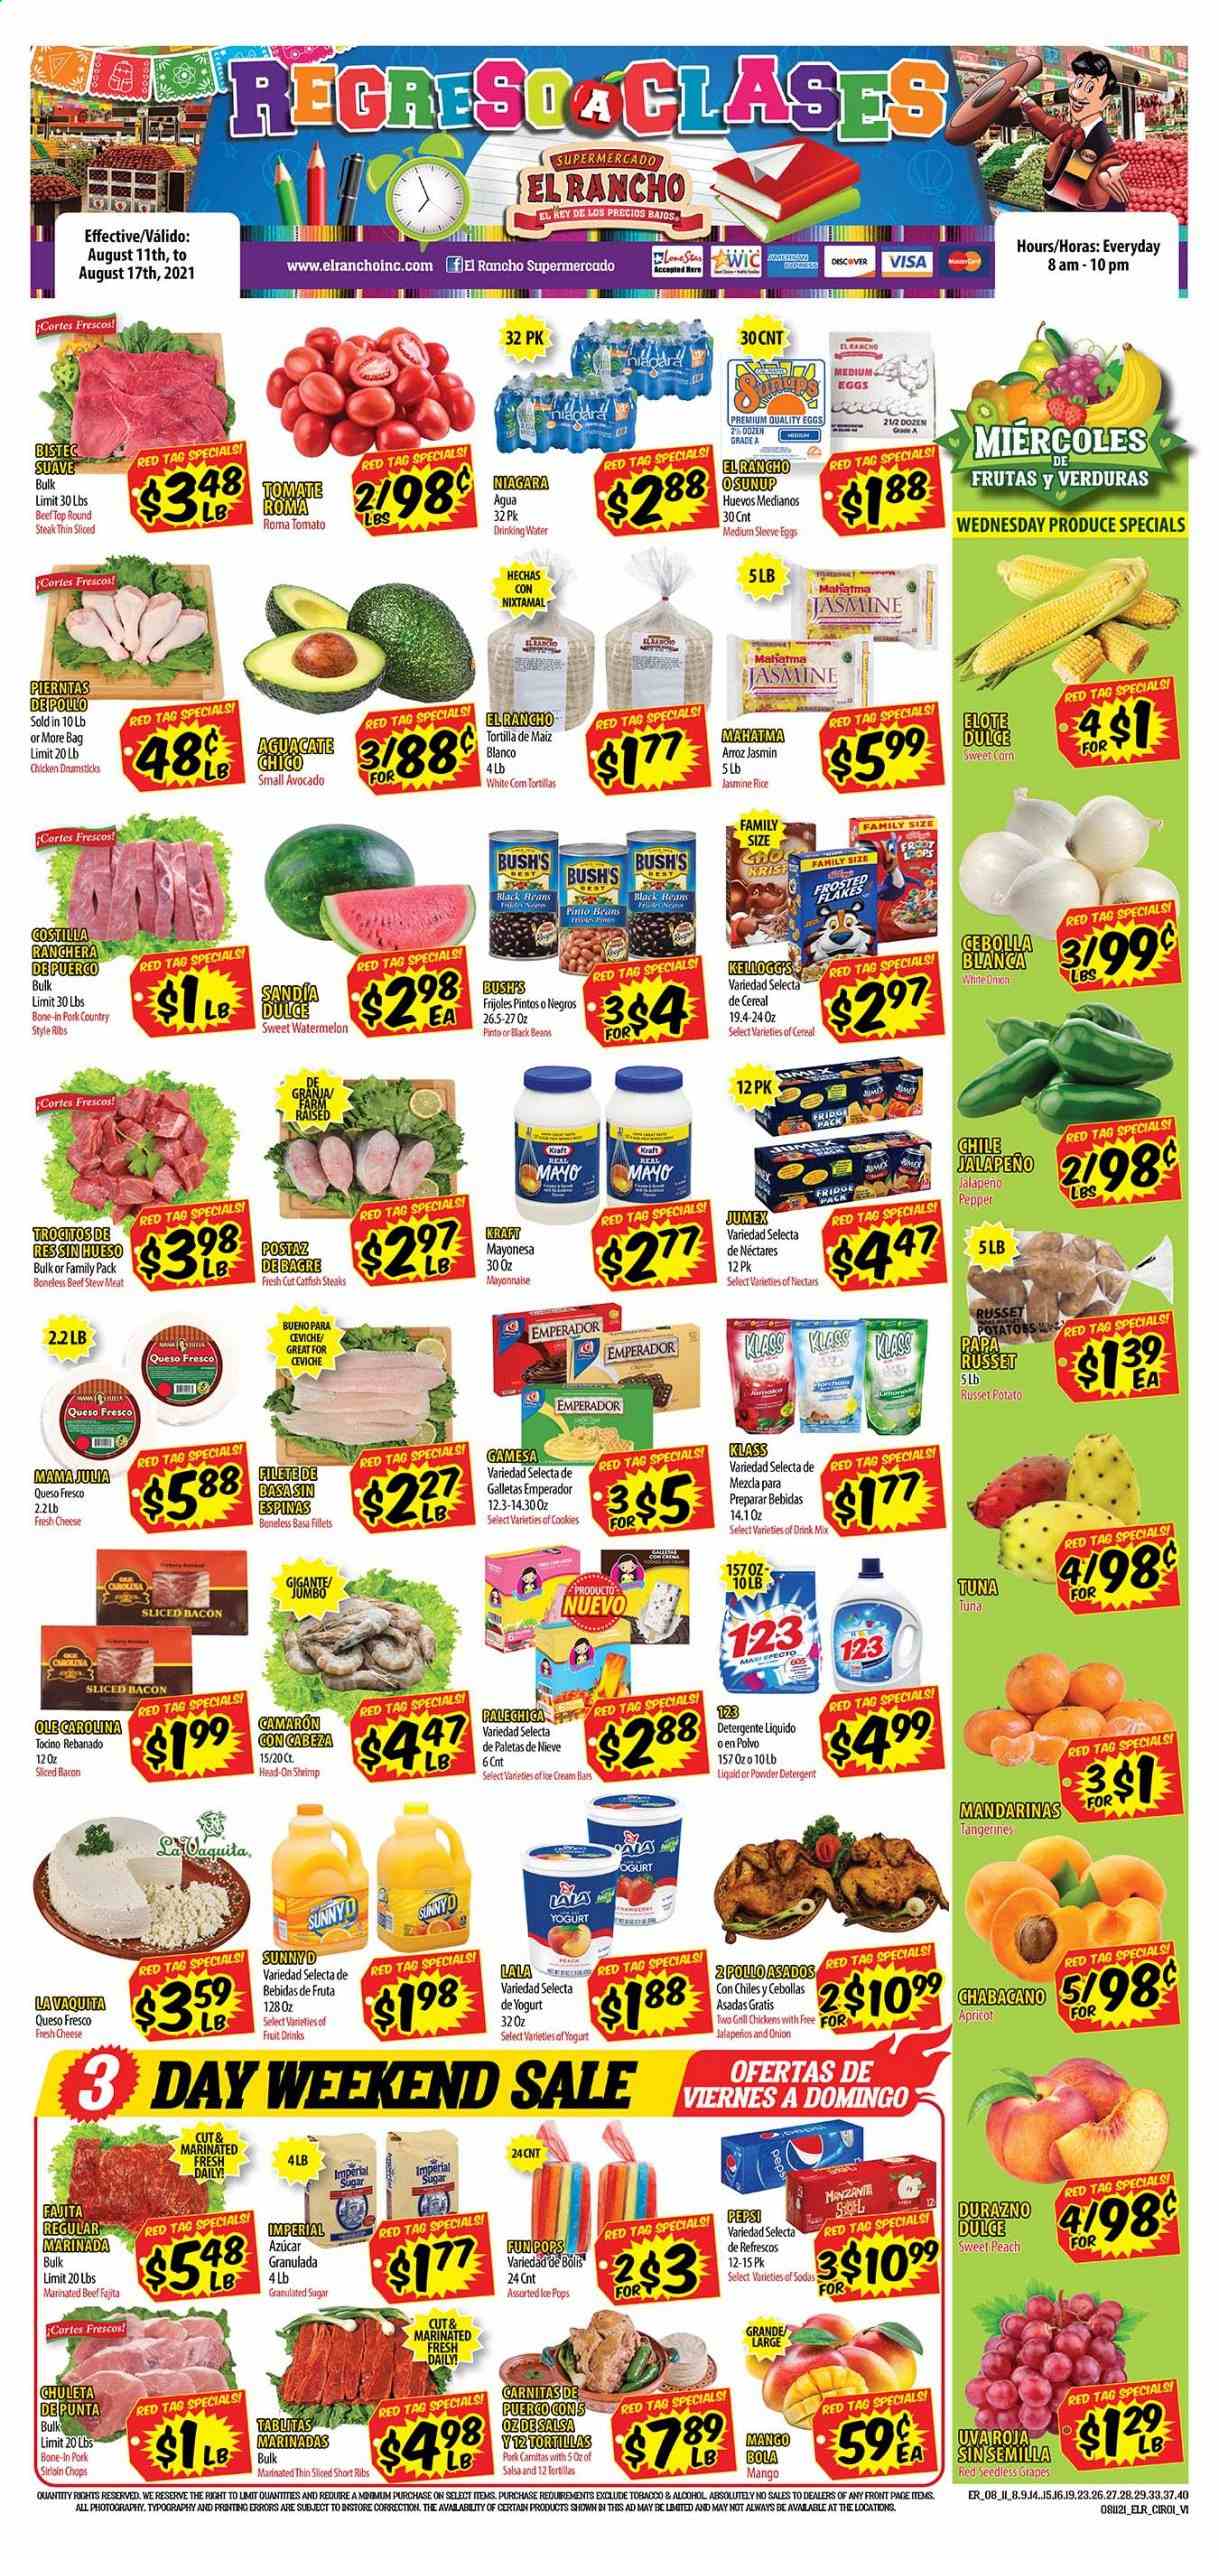 thumbnail - El Rancho Flyer - 08/11/2021 - 08/17/2021 - Sales products - stew meat, seedless grapes, corn tortillas, tortillas, beans, russet potatoes, tomatoes, potatoes, jalapeño, sweet corn, avocado, grapes, watermelon, catfish, tuna, shrimps, fajita, Kraft®, bacon, queso fresco, cheese, yoghurt, eggs, mayonnaise, cookies, sugar, black beans, pinto beans, cereals, rice, jasmine rice, salsa, Pepsi, alcohol, Sol, chicken drumsticks, beef meat, steak, round steak, marinated beef, pork loin, pork ribs, country style ribs, tangerines. Page 1.